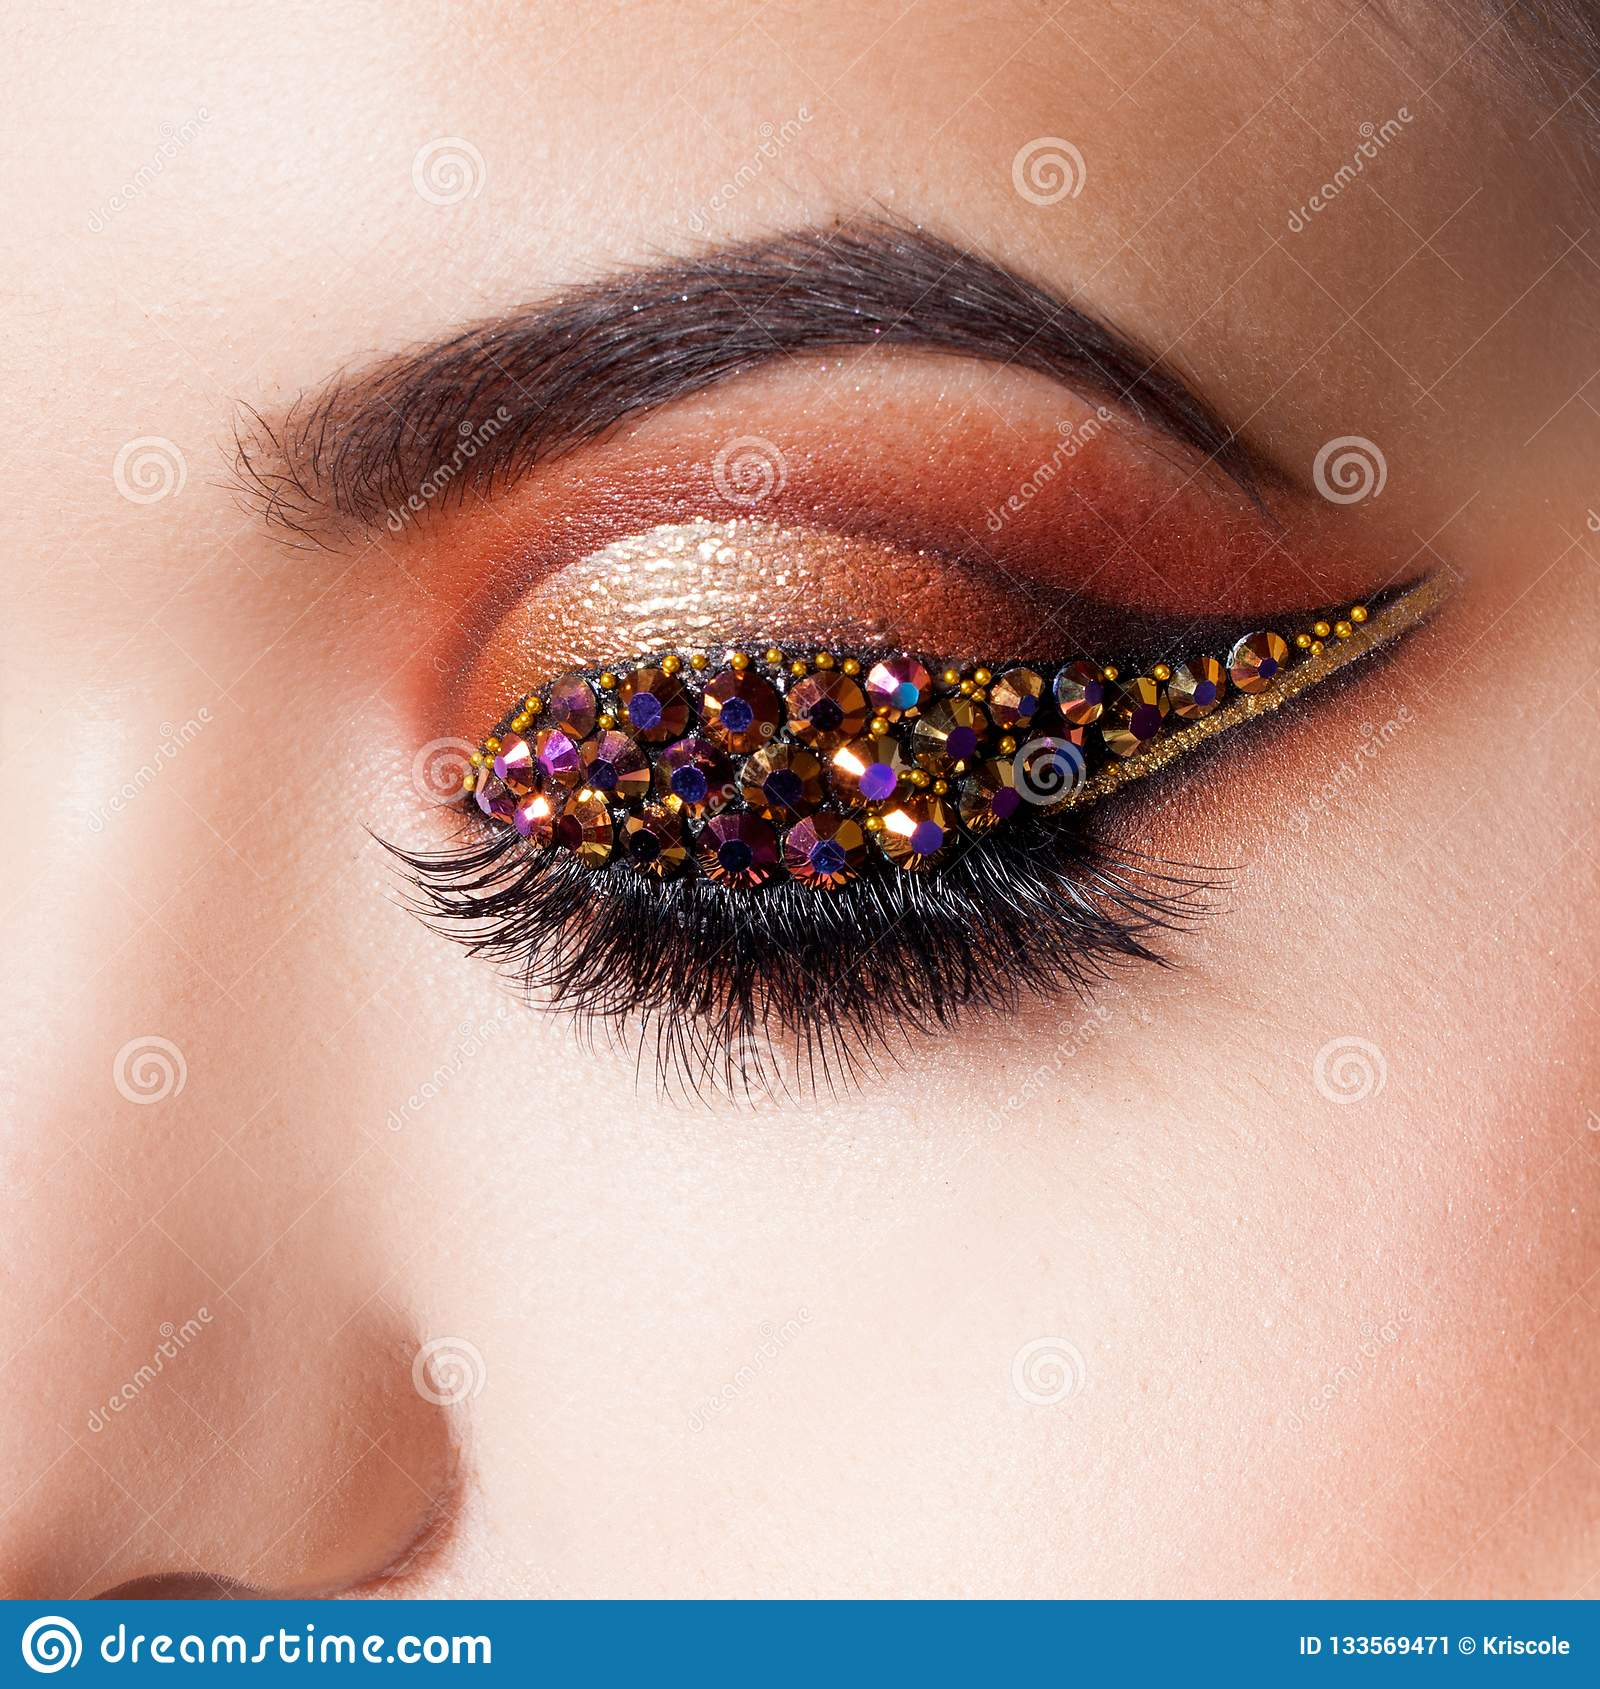 Amazing Eye Makeup Amazing Bright Eye Makeup With A Arrow With Rhinestones Brown And